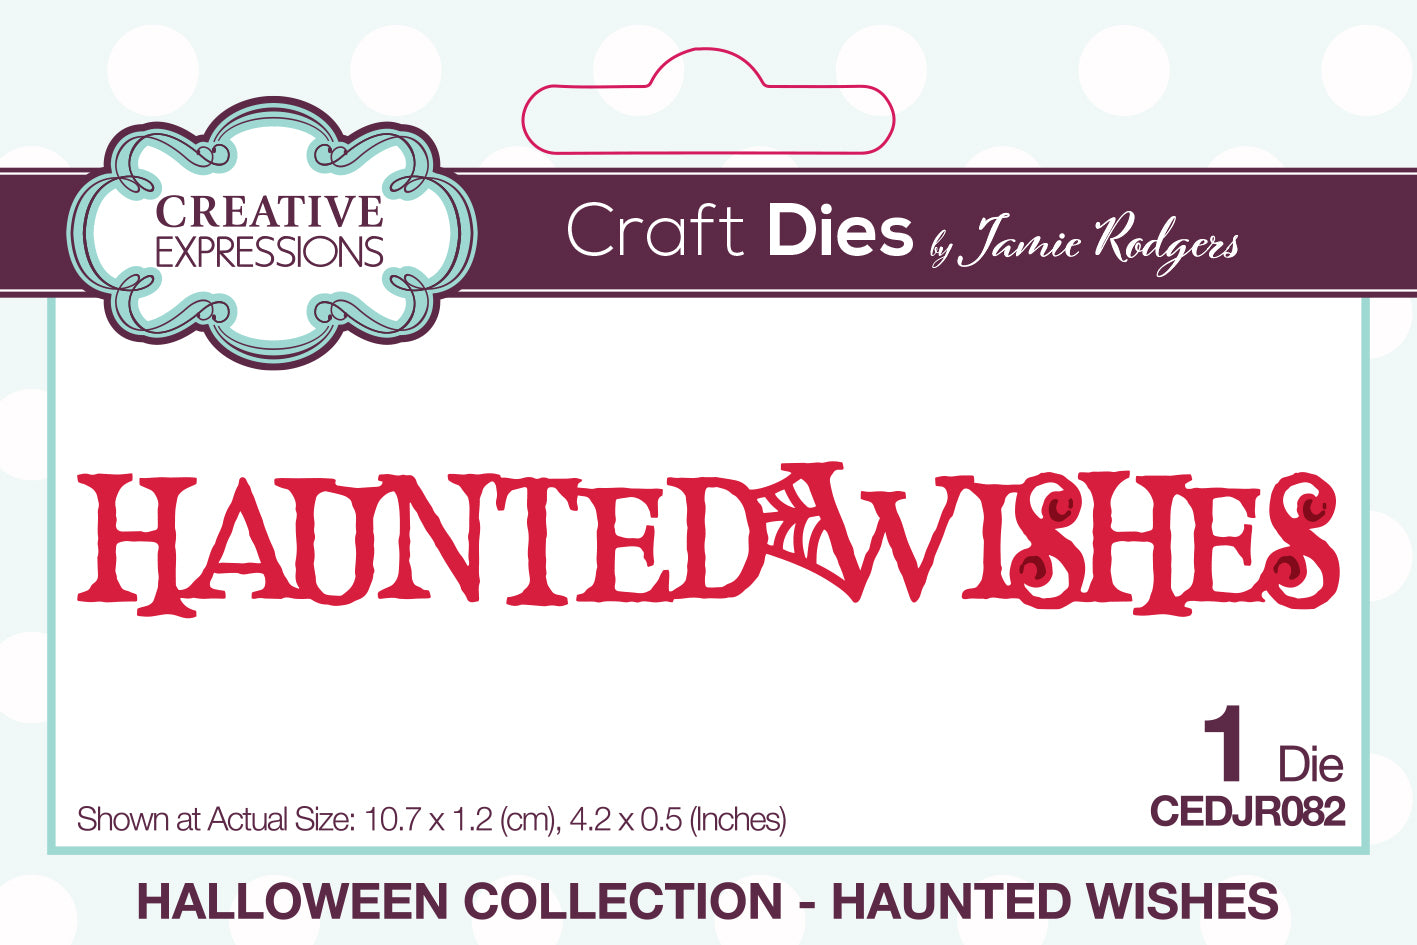 Creative Expressions Jamie Rodgers Halloween Haunted Wishes Craft Die